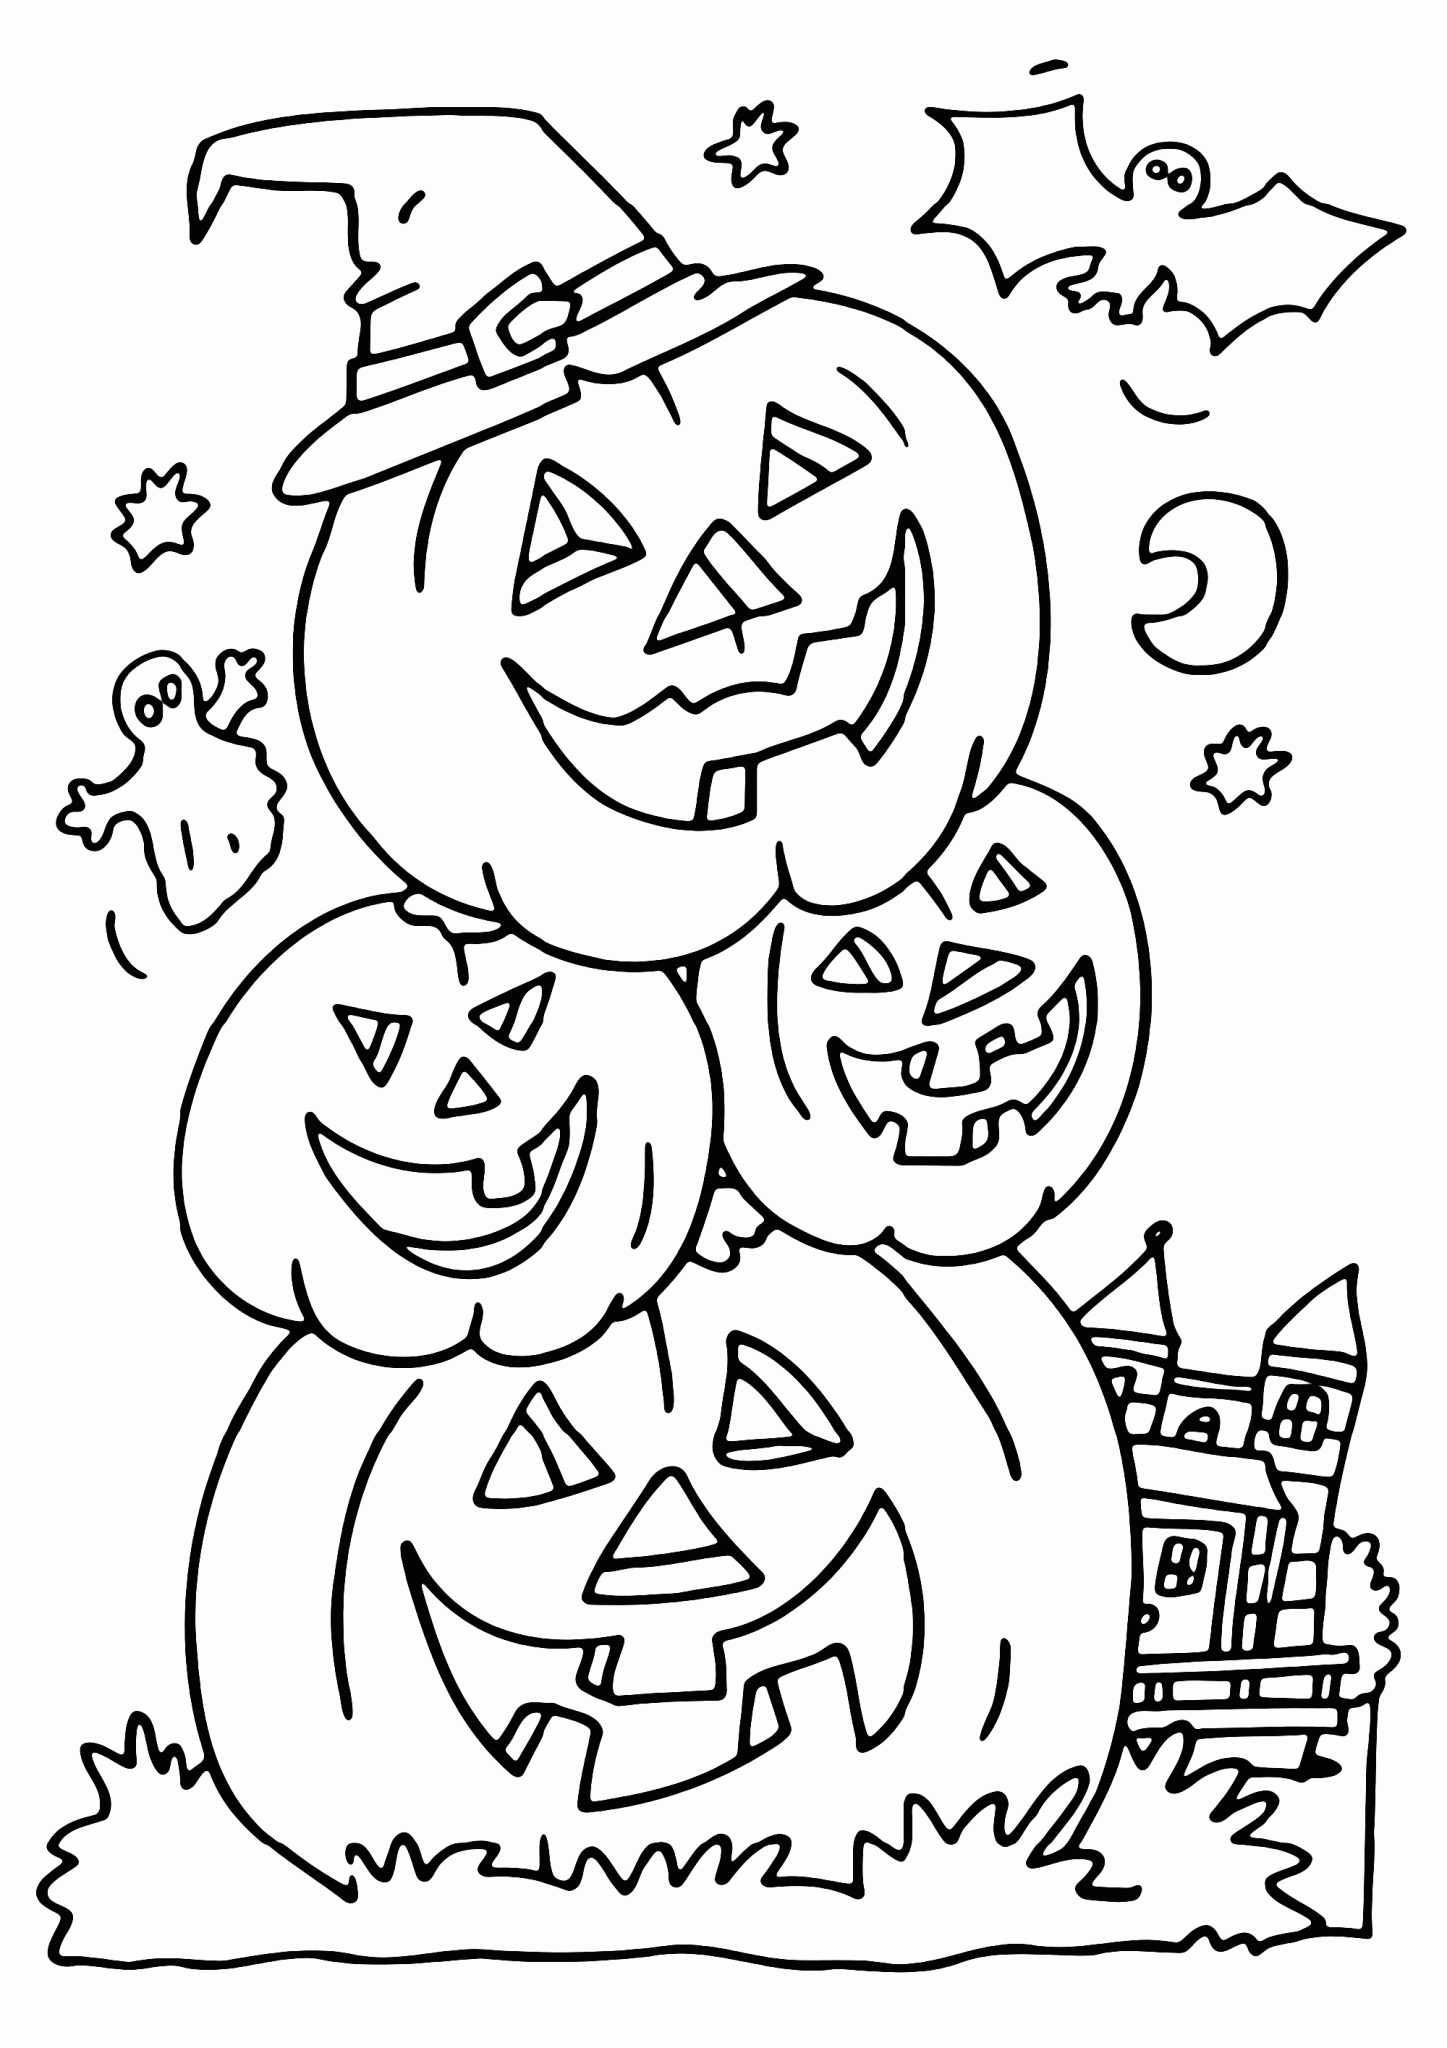 Spooky Halloween Coloring Pages (Updated 2020): Printable PDF